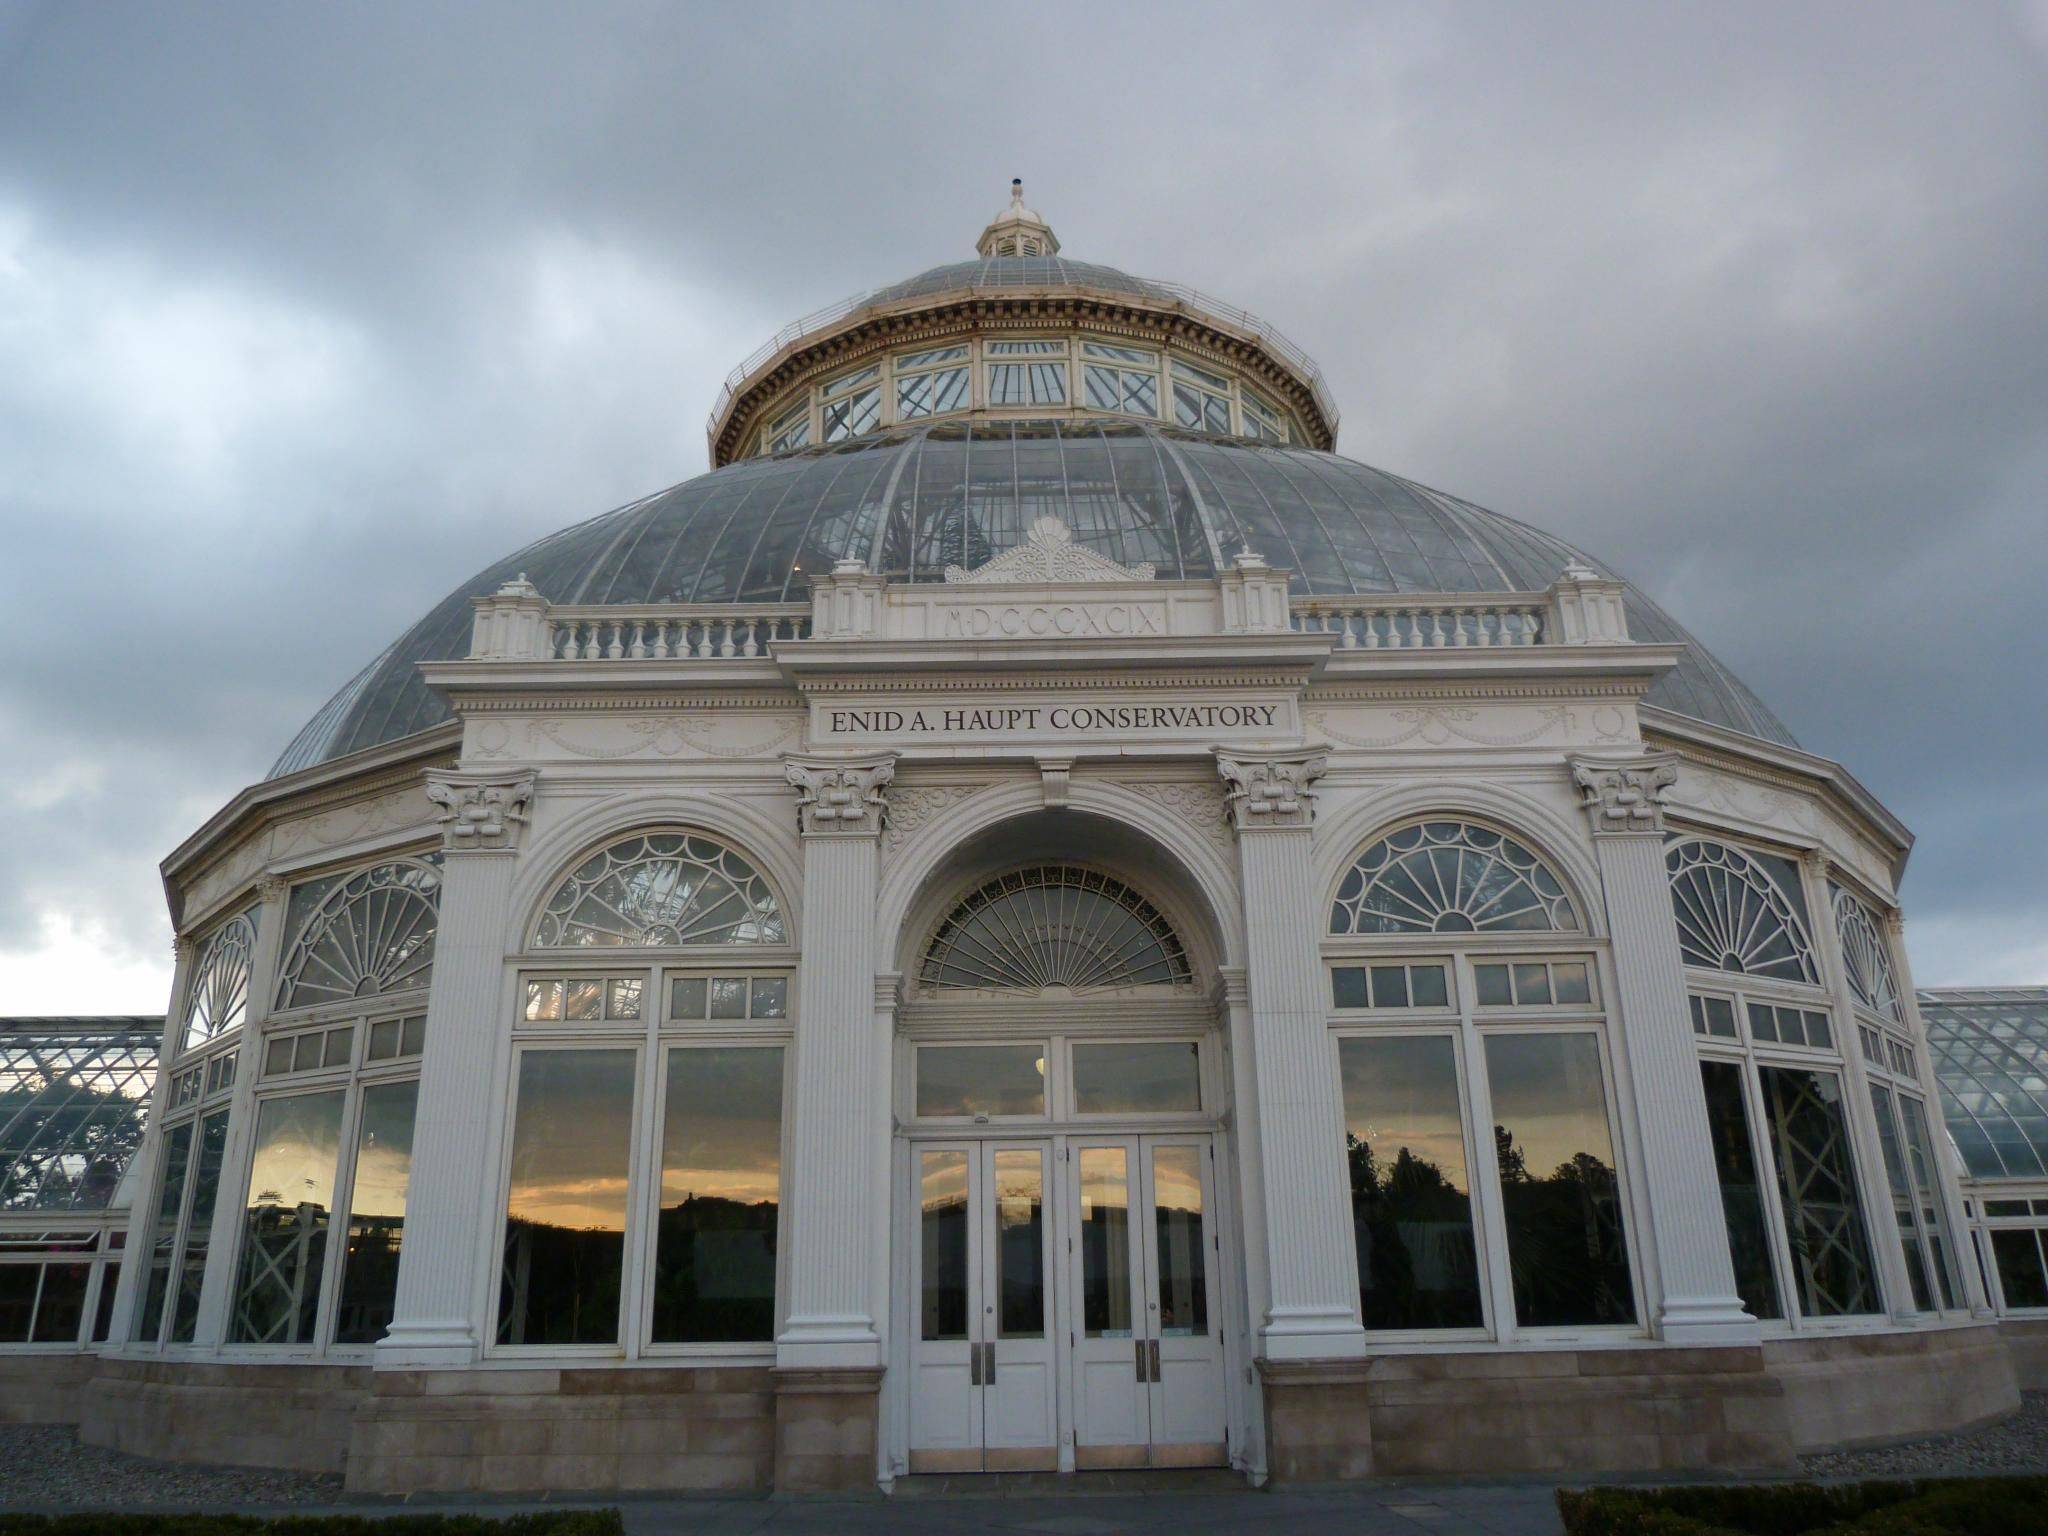 The Enid A Haupt Conservatory